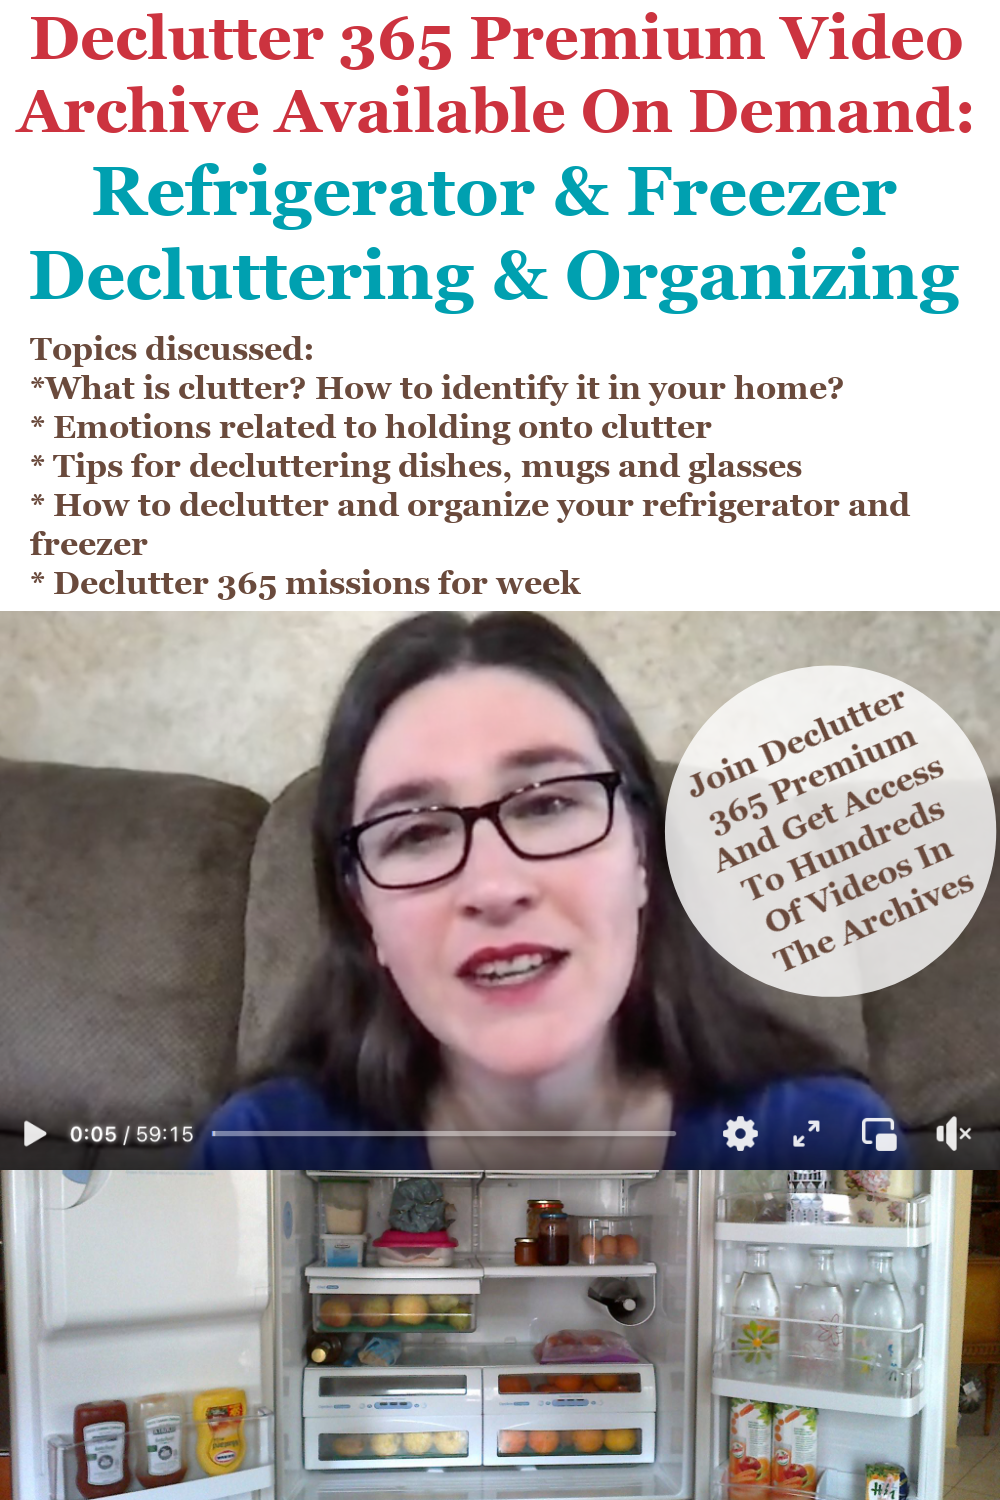 Declutter 365 Premium video archive available on demand all about decluttering and organizing your refrigerator and freezer, on Home Storage Solutions 101